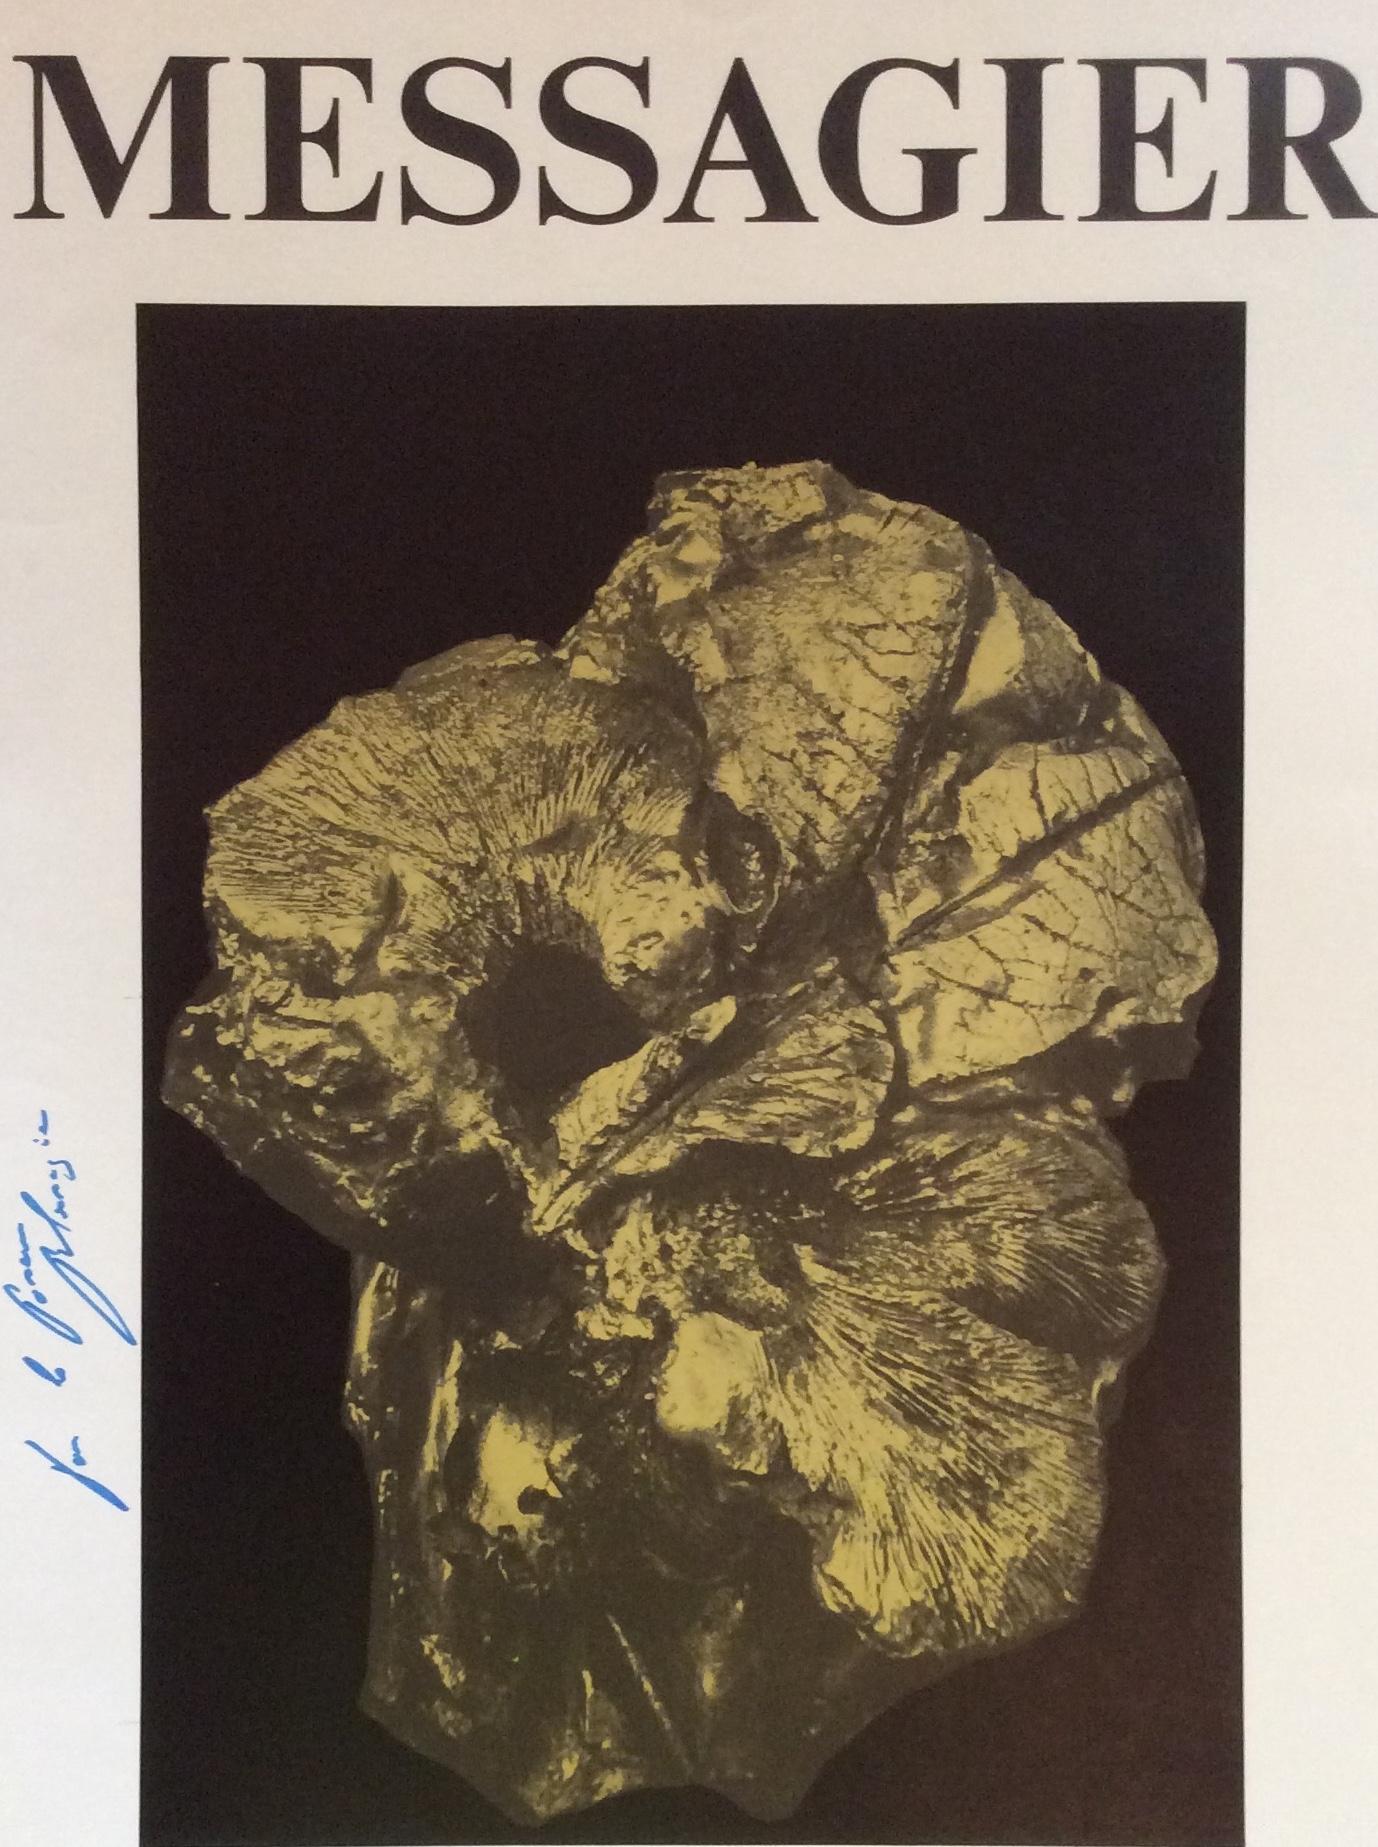 French Poster Signed by Jean Messagier, 1975 depicting Bronze Sculptures In Good Condition For Sale In Miami, FL